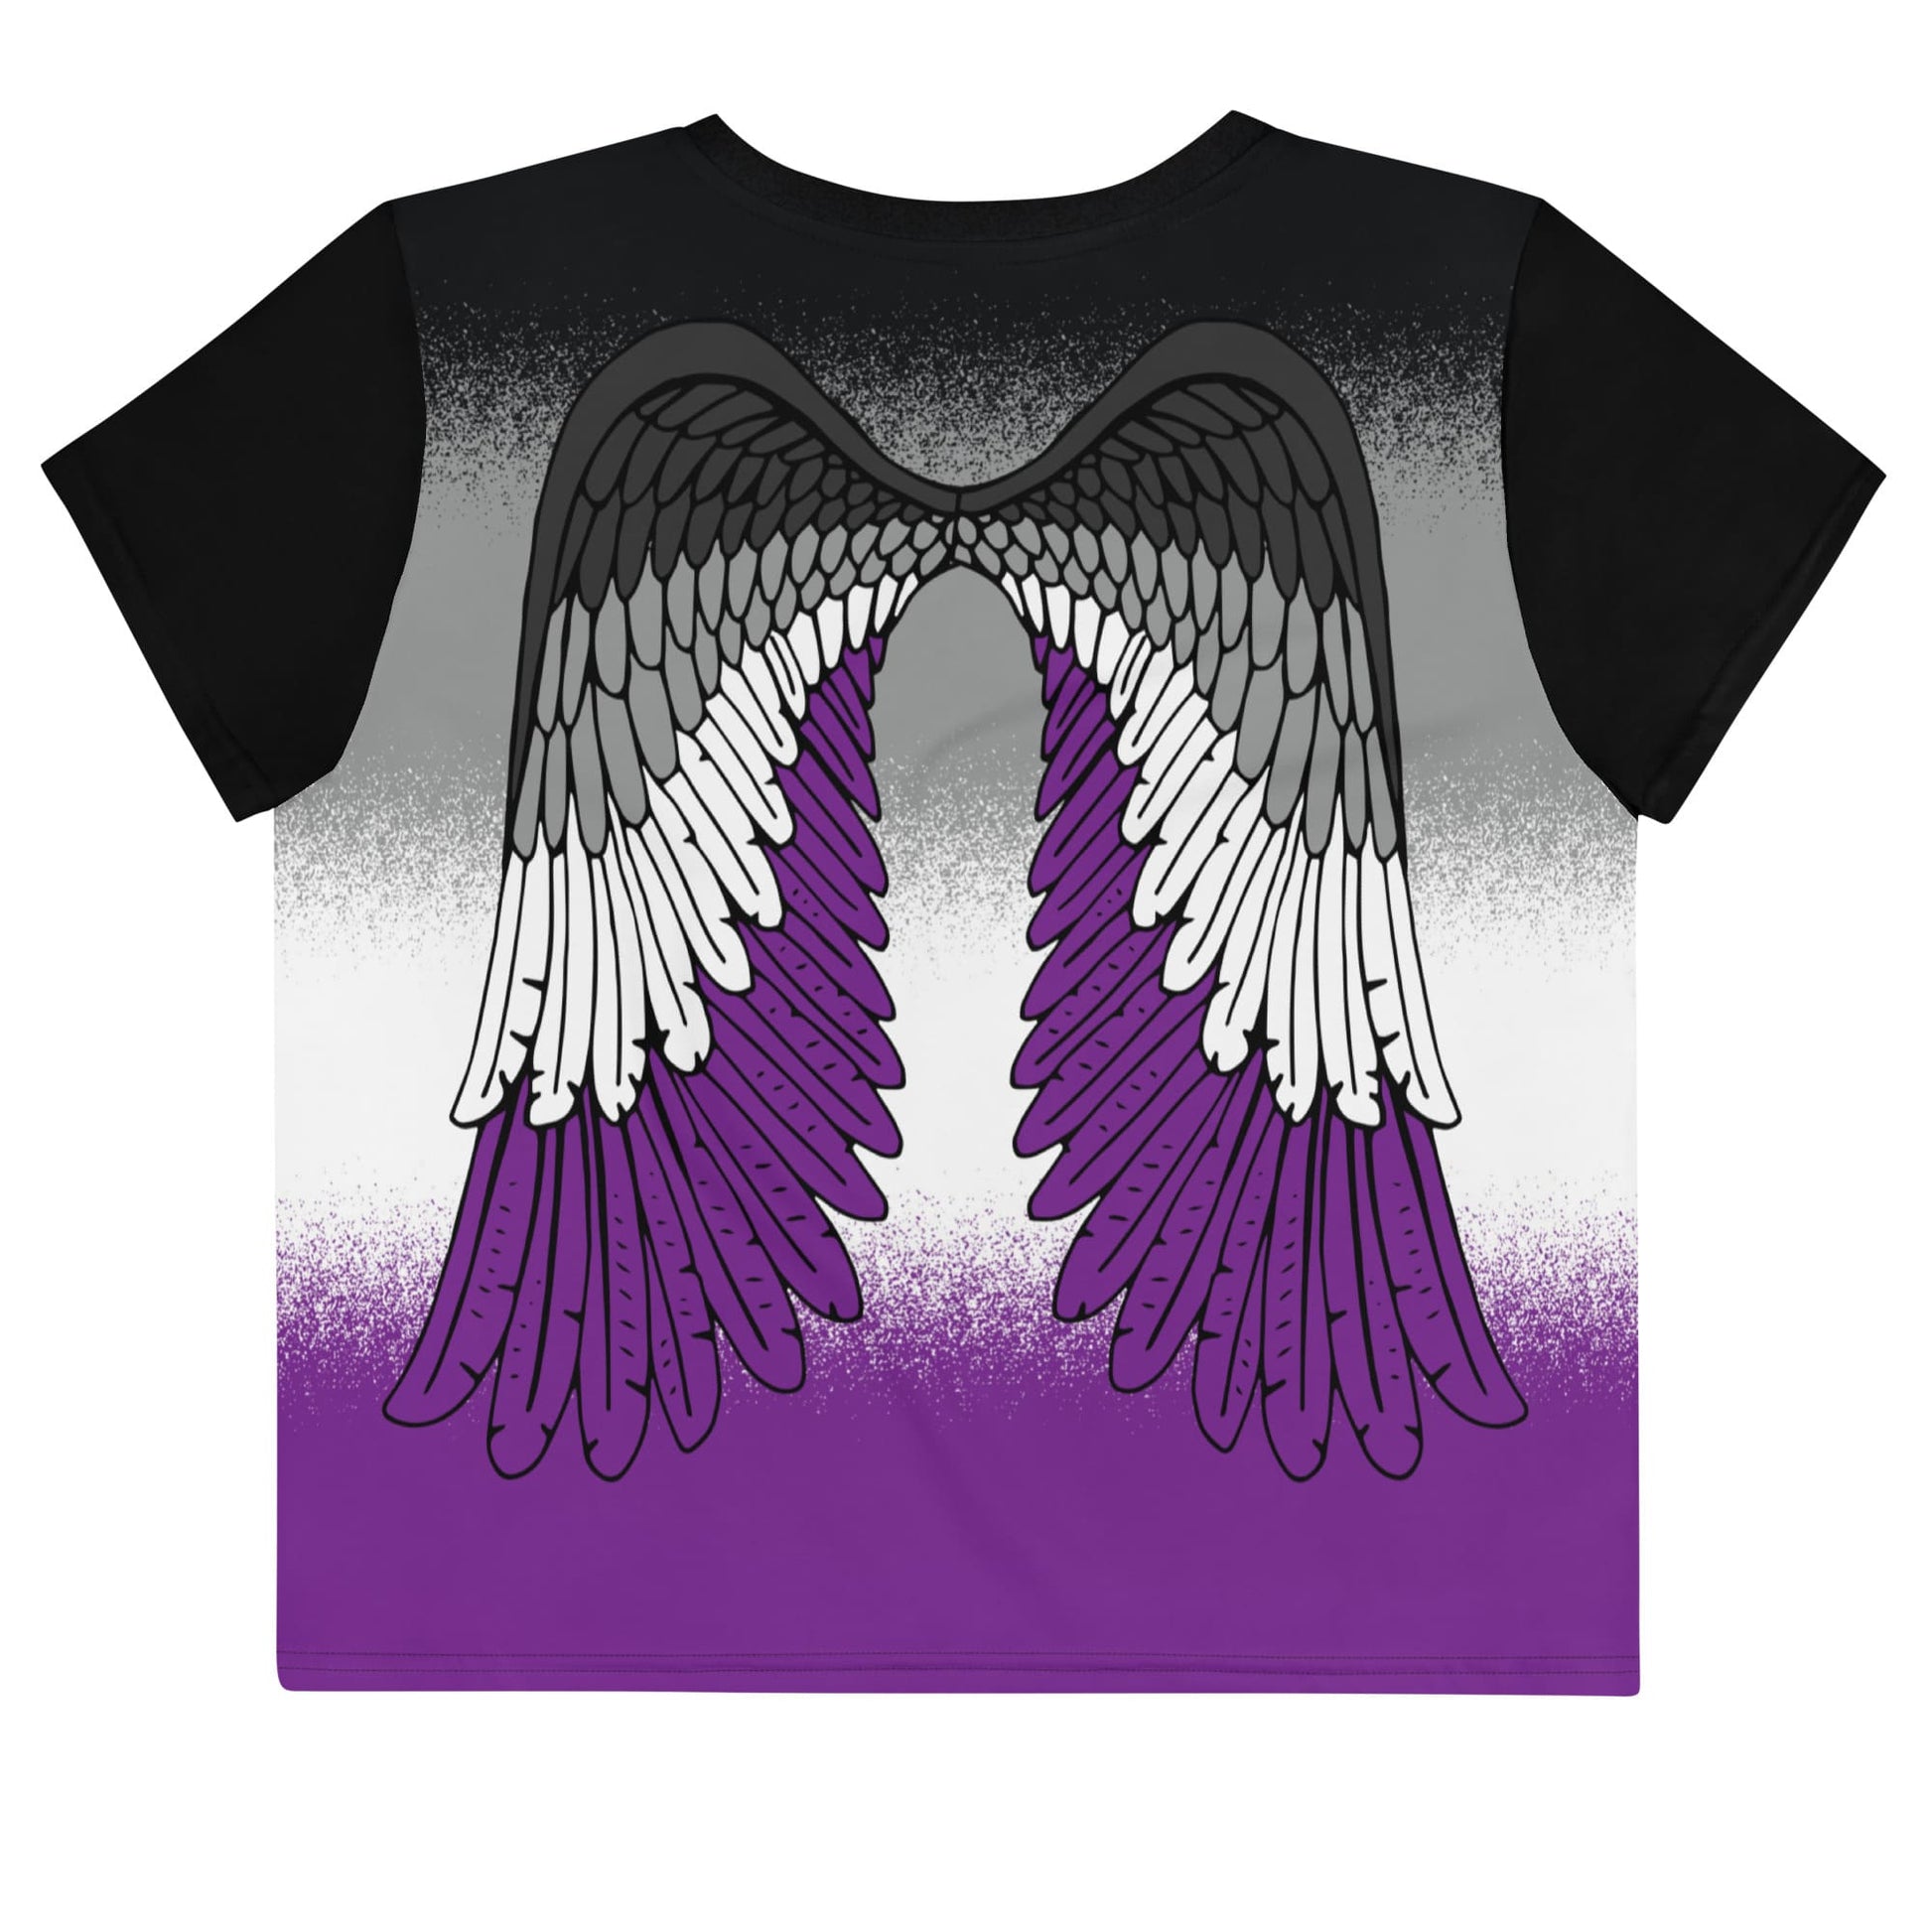 asexual crop top, ace pride cropped shirt with wings at the back, flatlay back